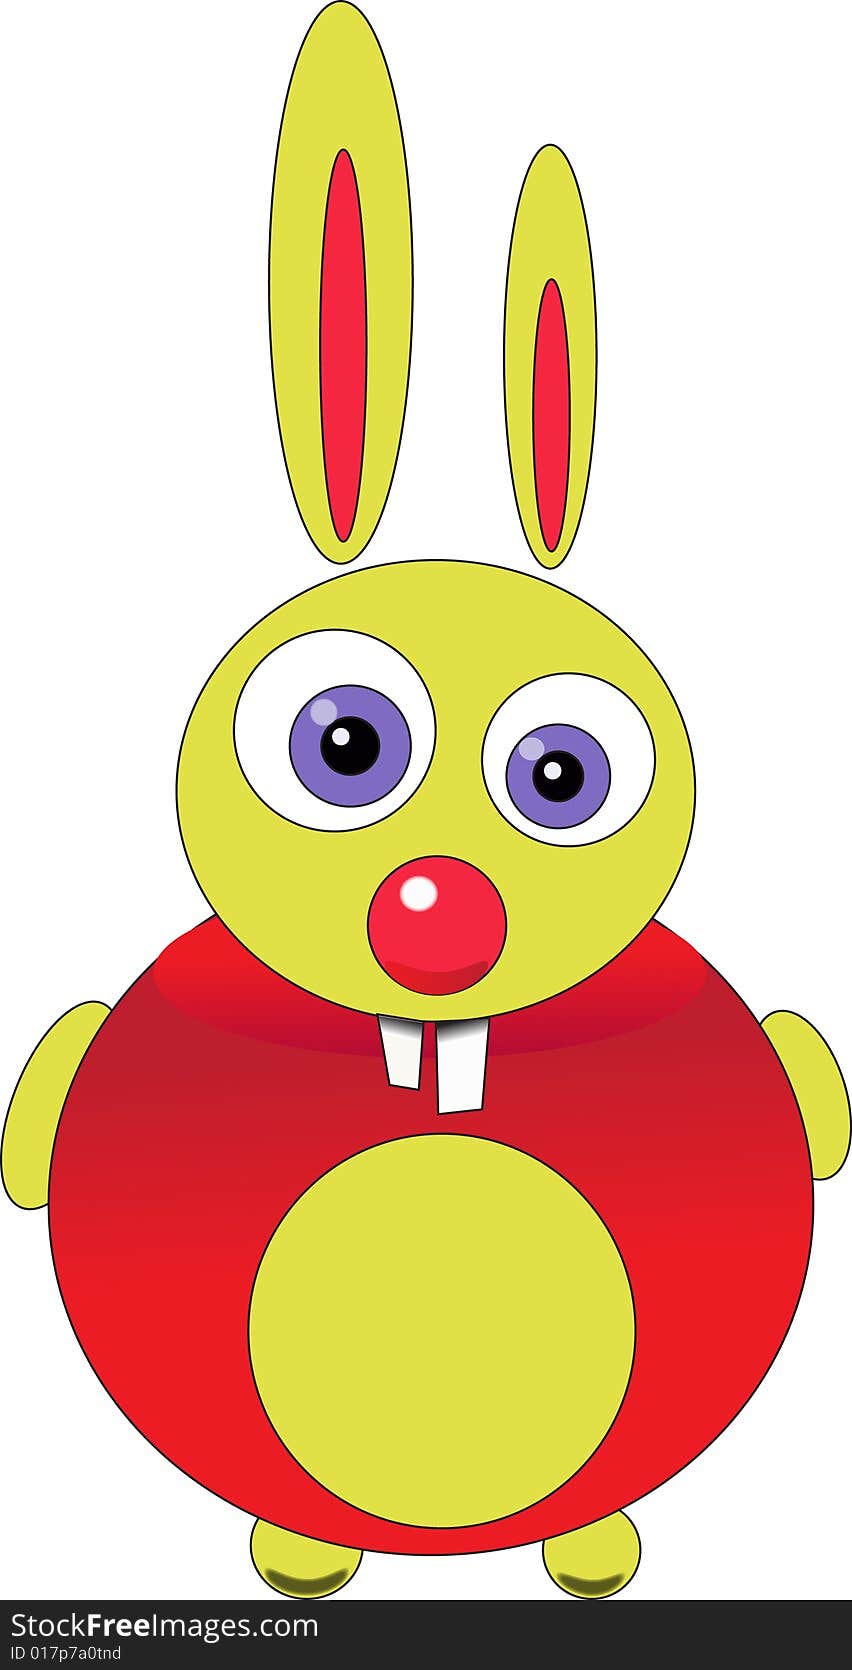 Red and yellow Rabbit with big teeth